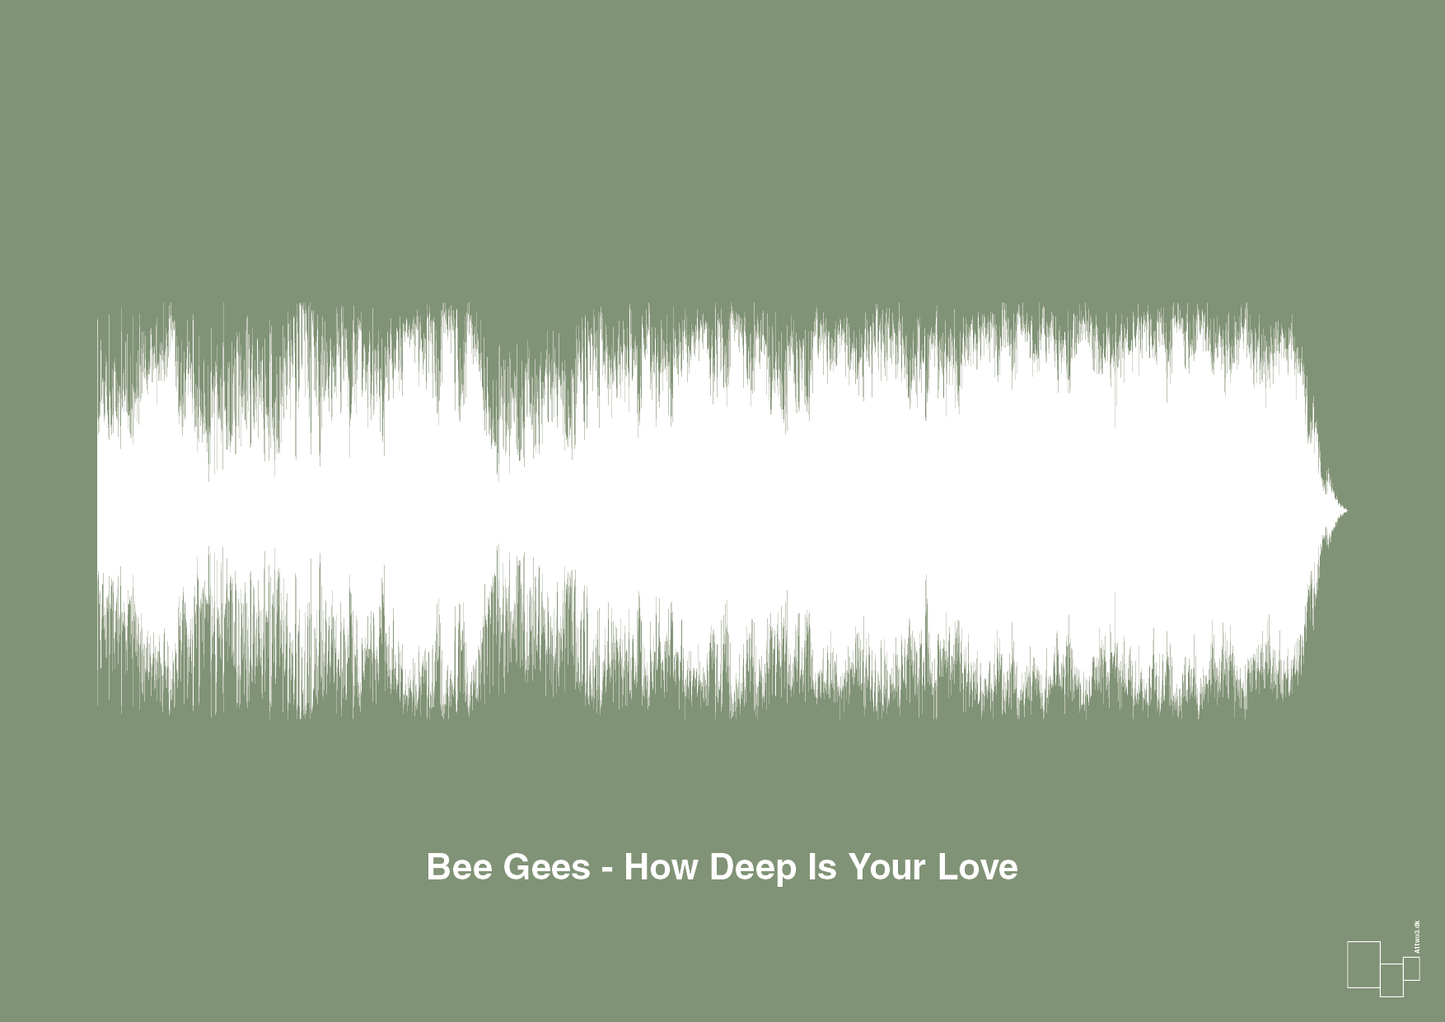 bee gees - how deep is your love - Plakat med Musik i Jade